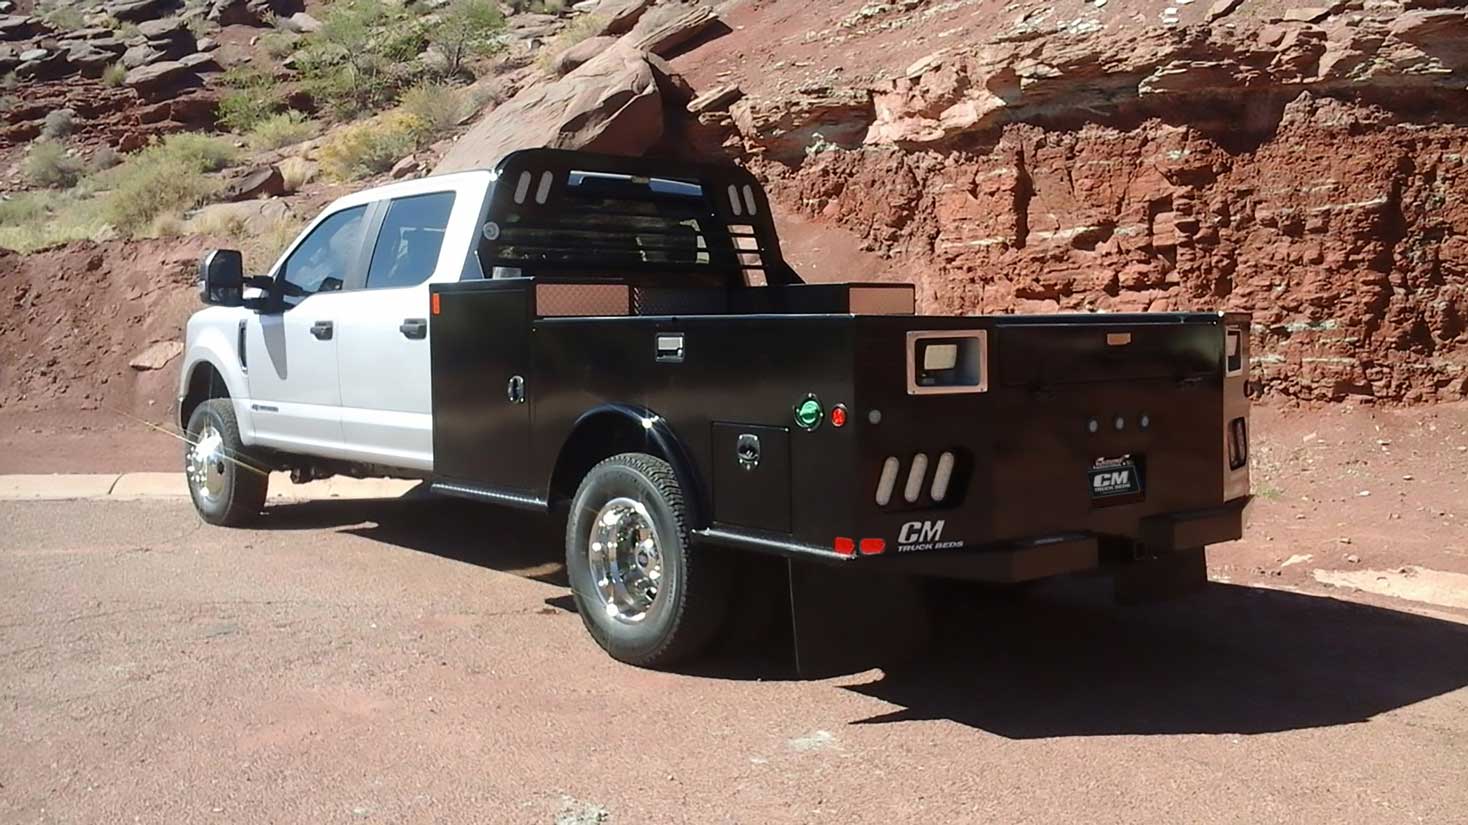 TM towing-style flatbed next to mountain with work light option